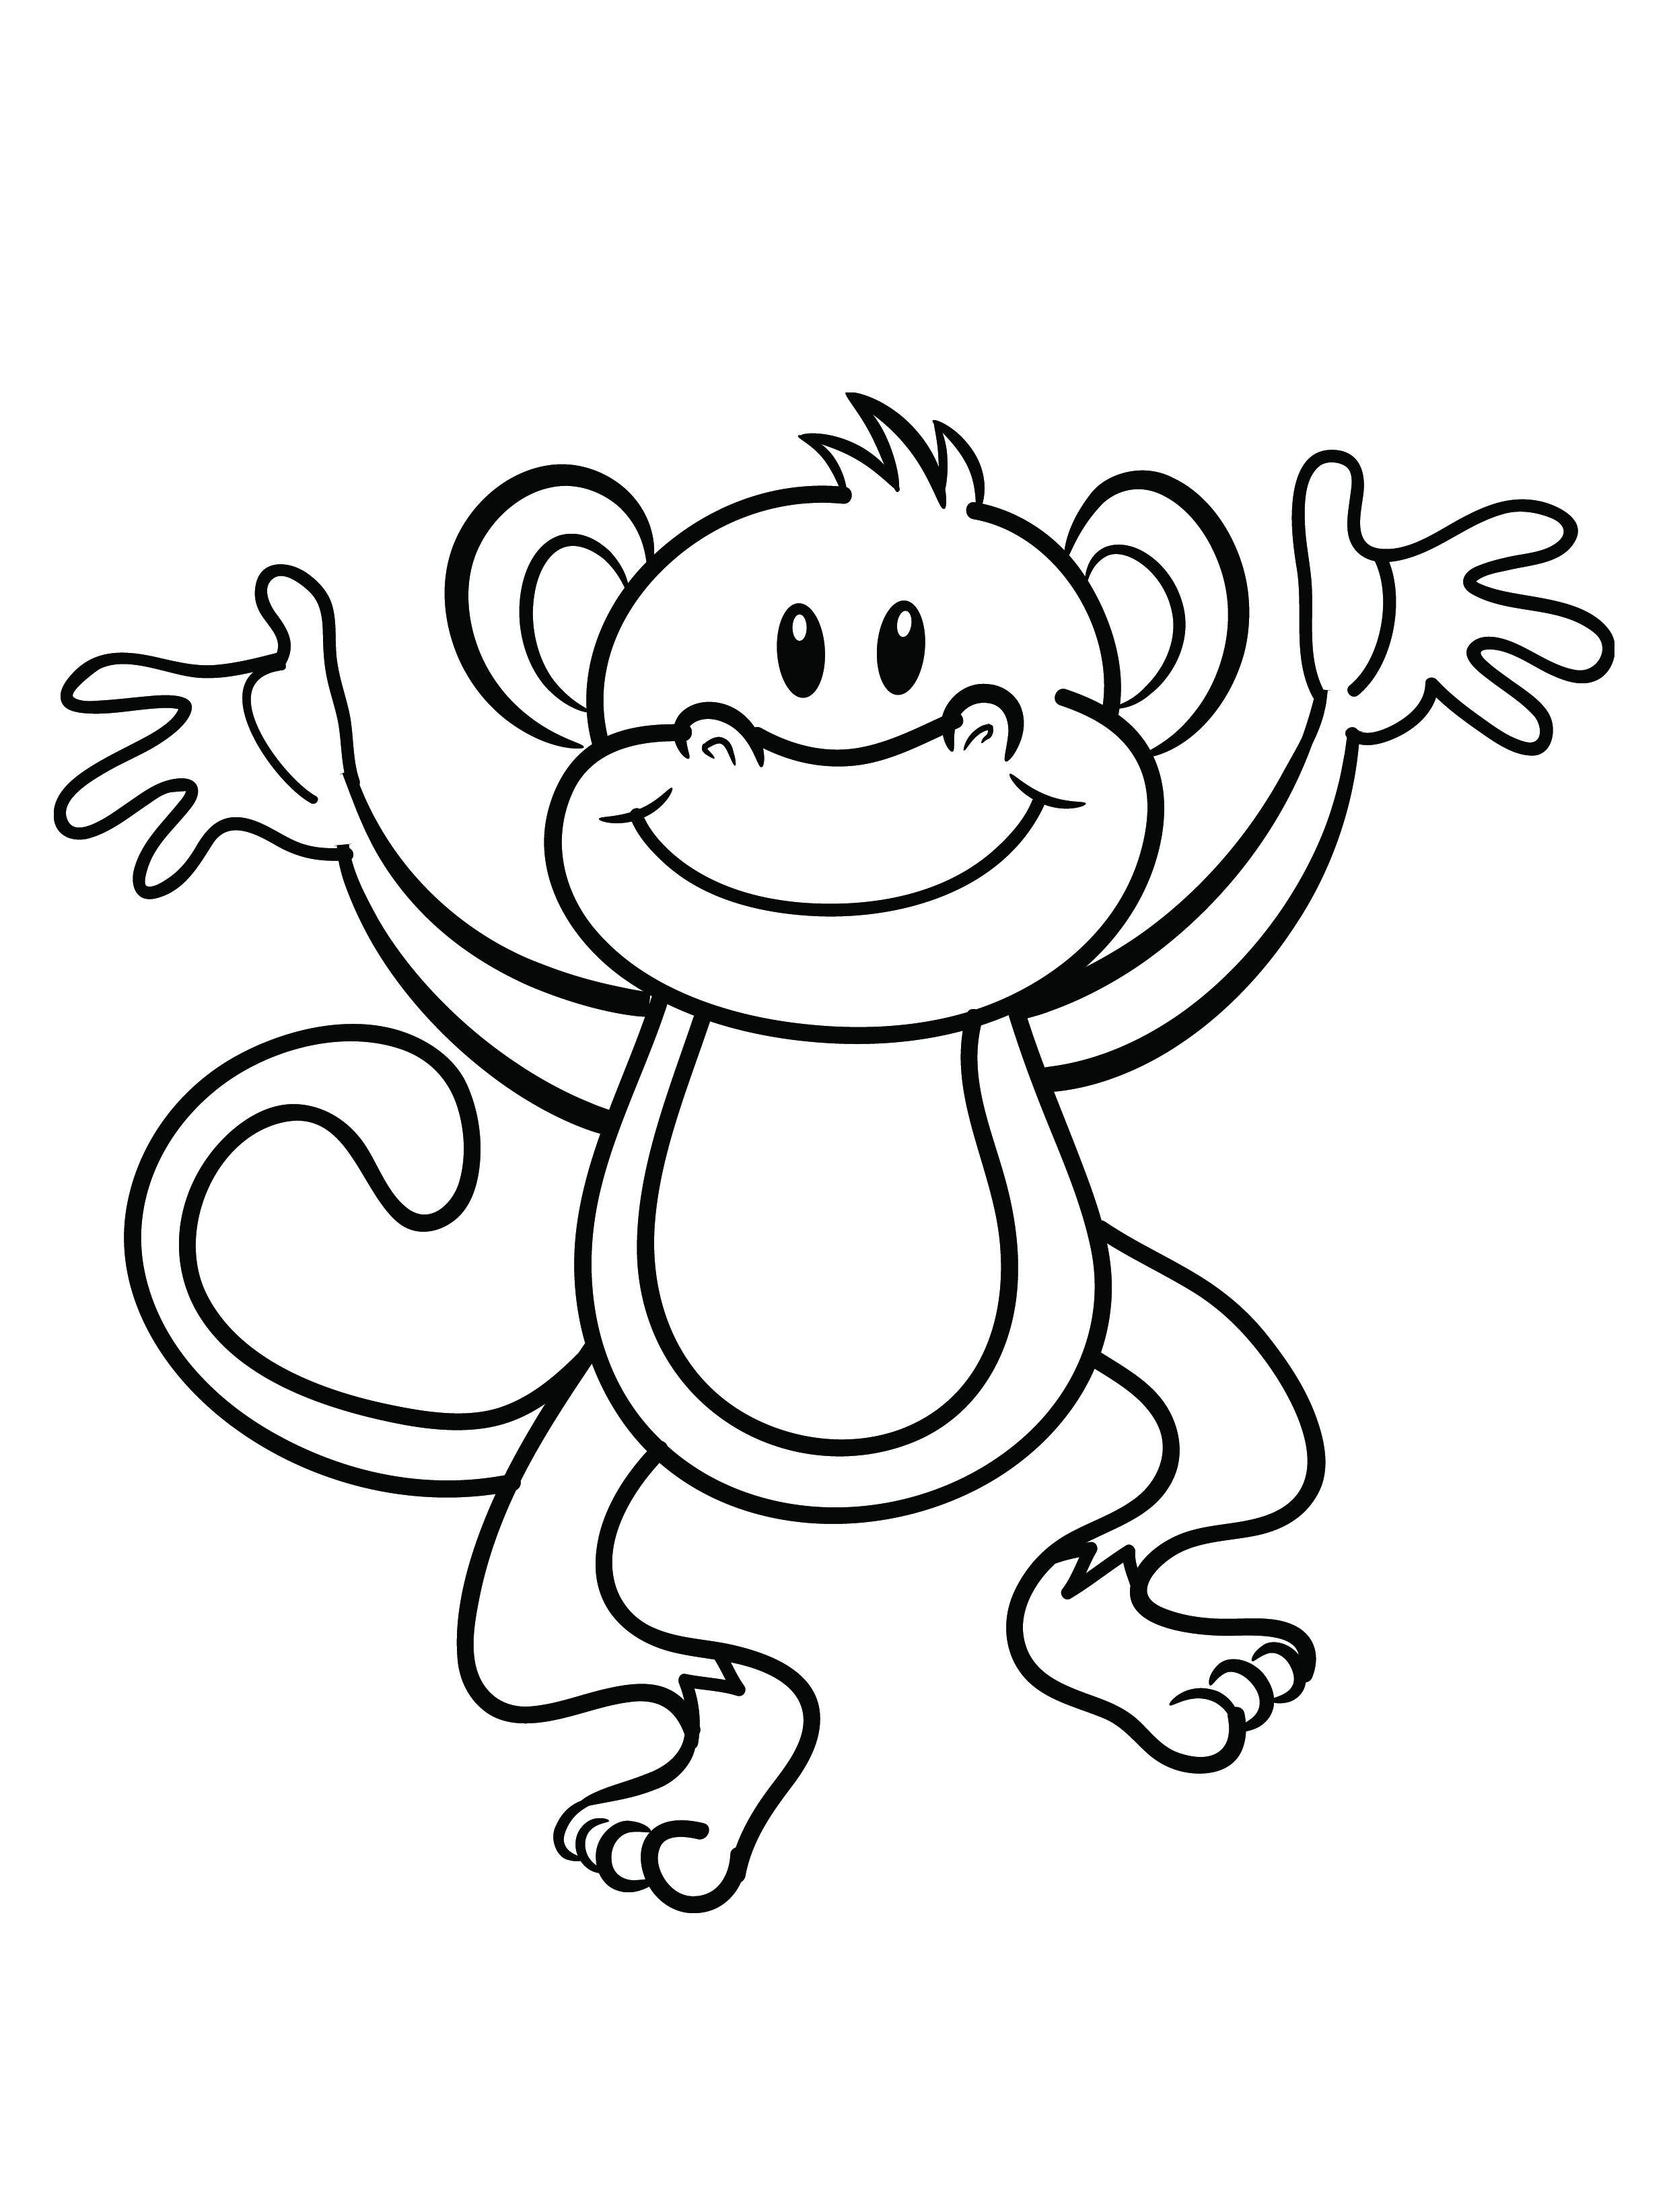 Coloring-Pages-of-Monkeys